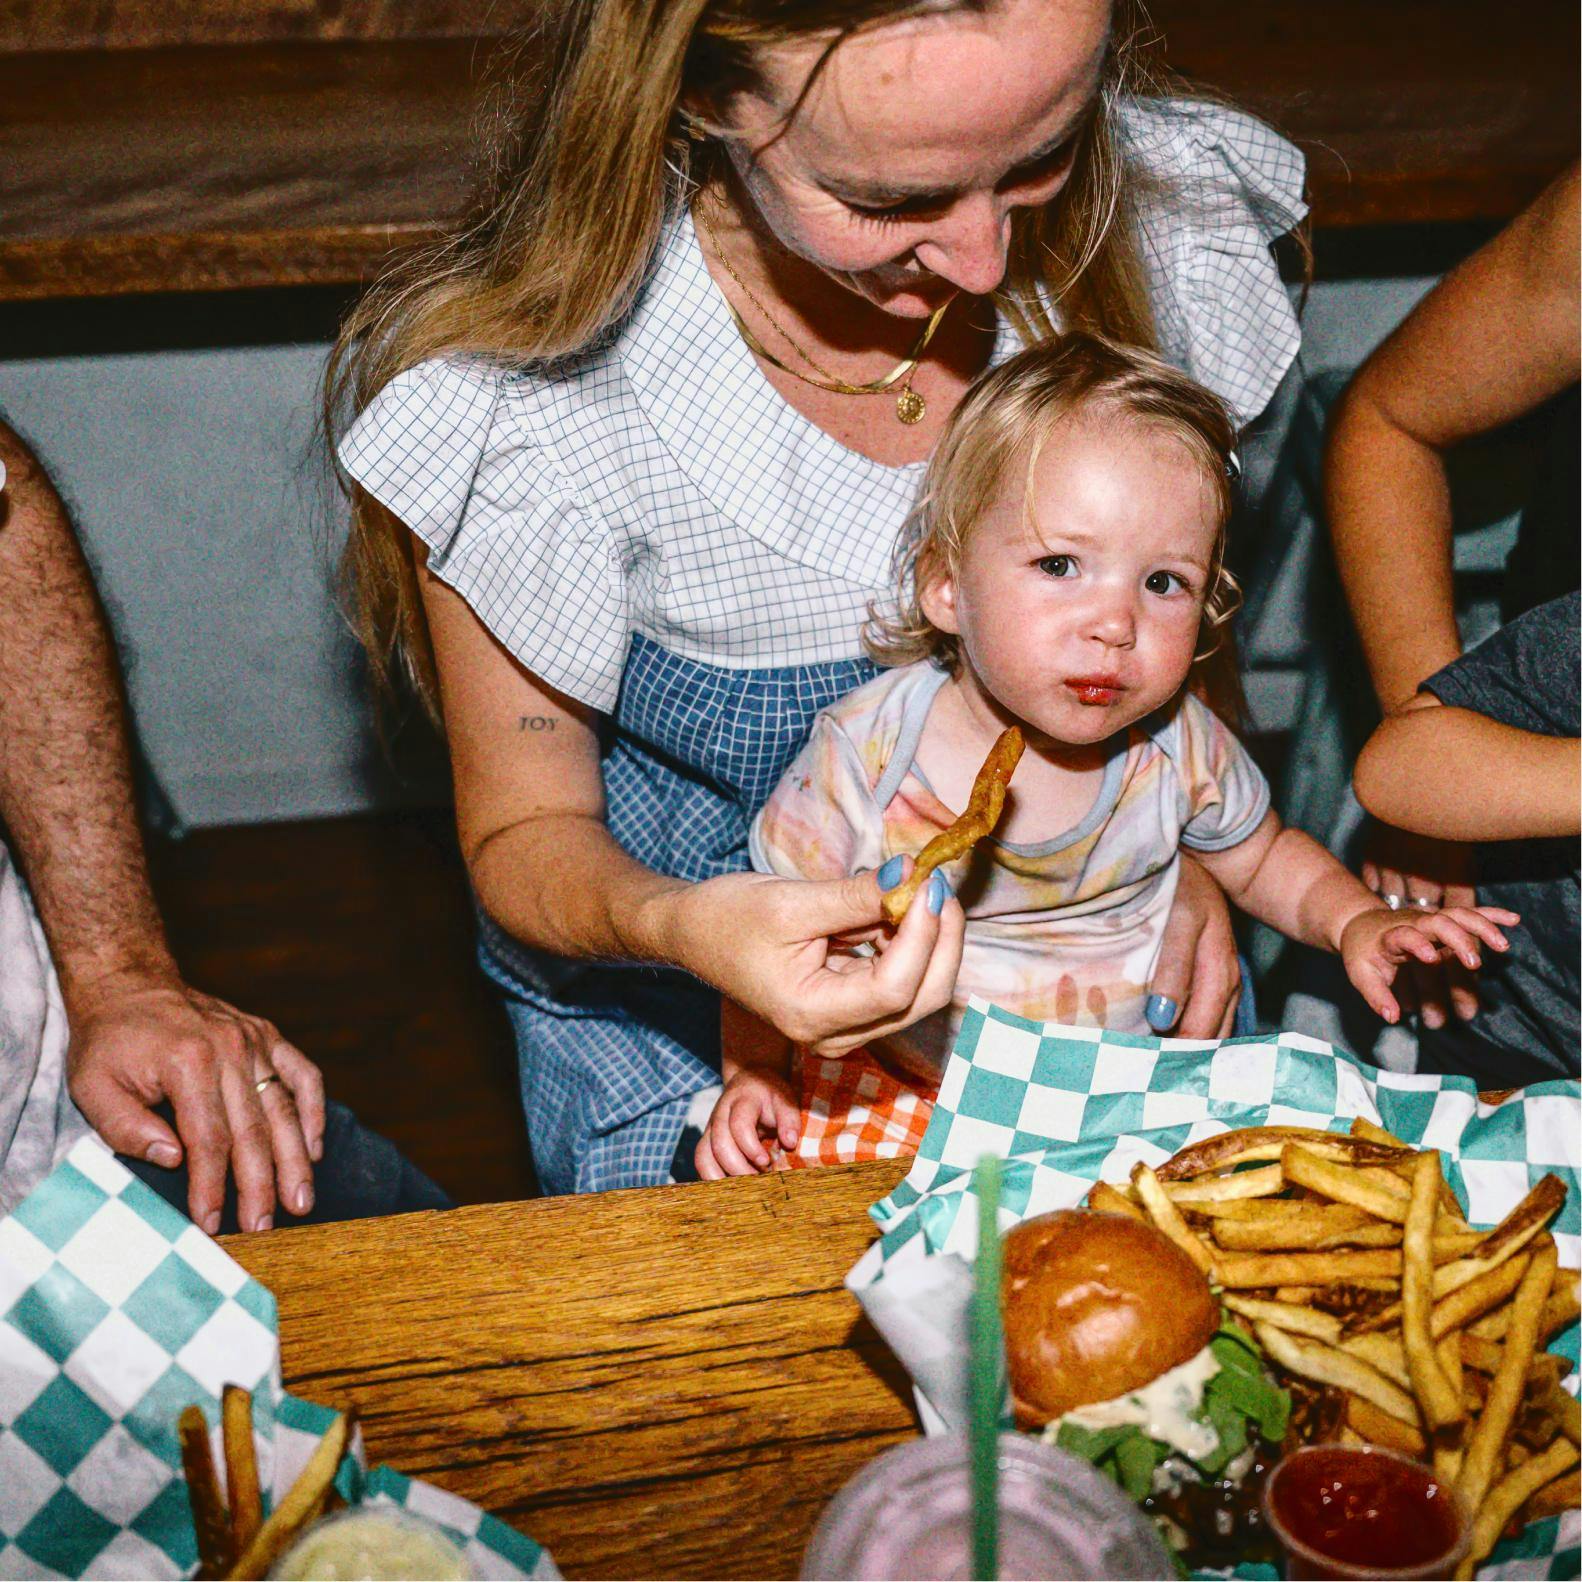 Mom and kid eating fries